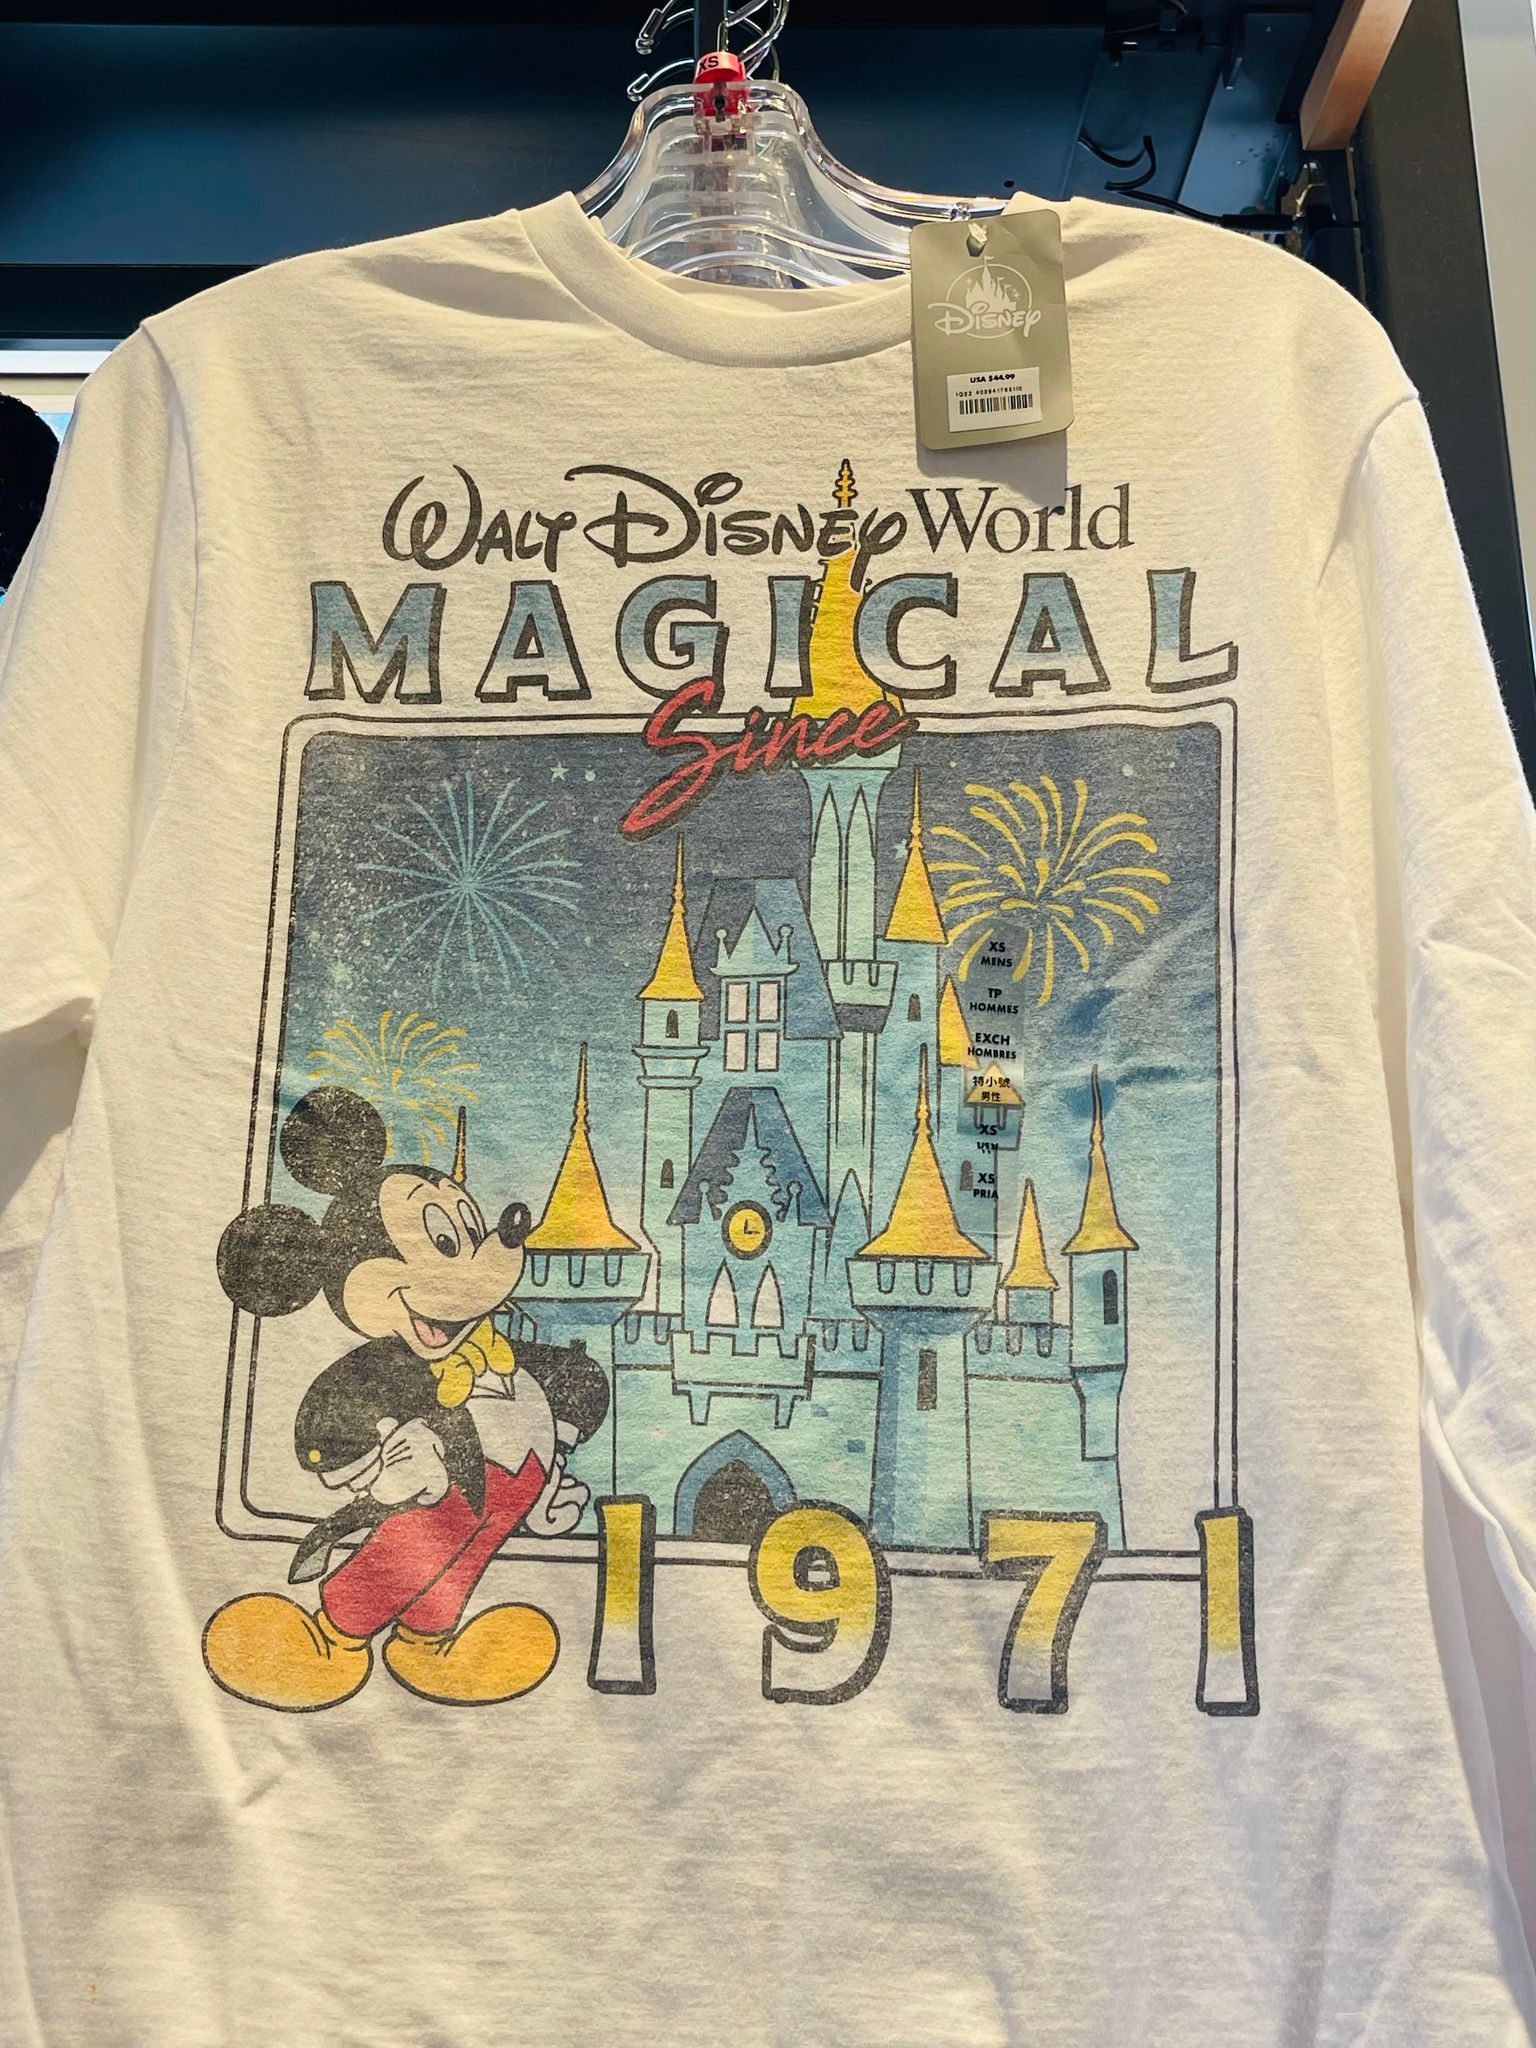 PHOTOS: Colorful New Walt Disney World Long-Sleeved Shirt Now Available -  WDW News Today